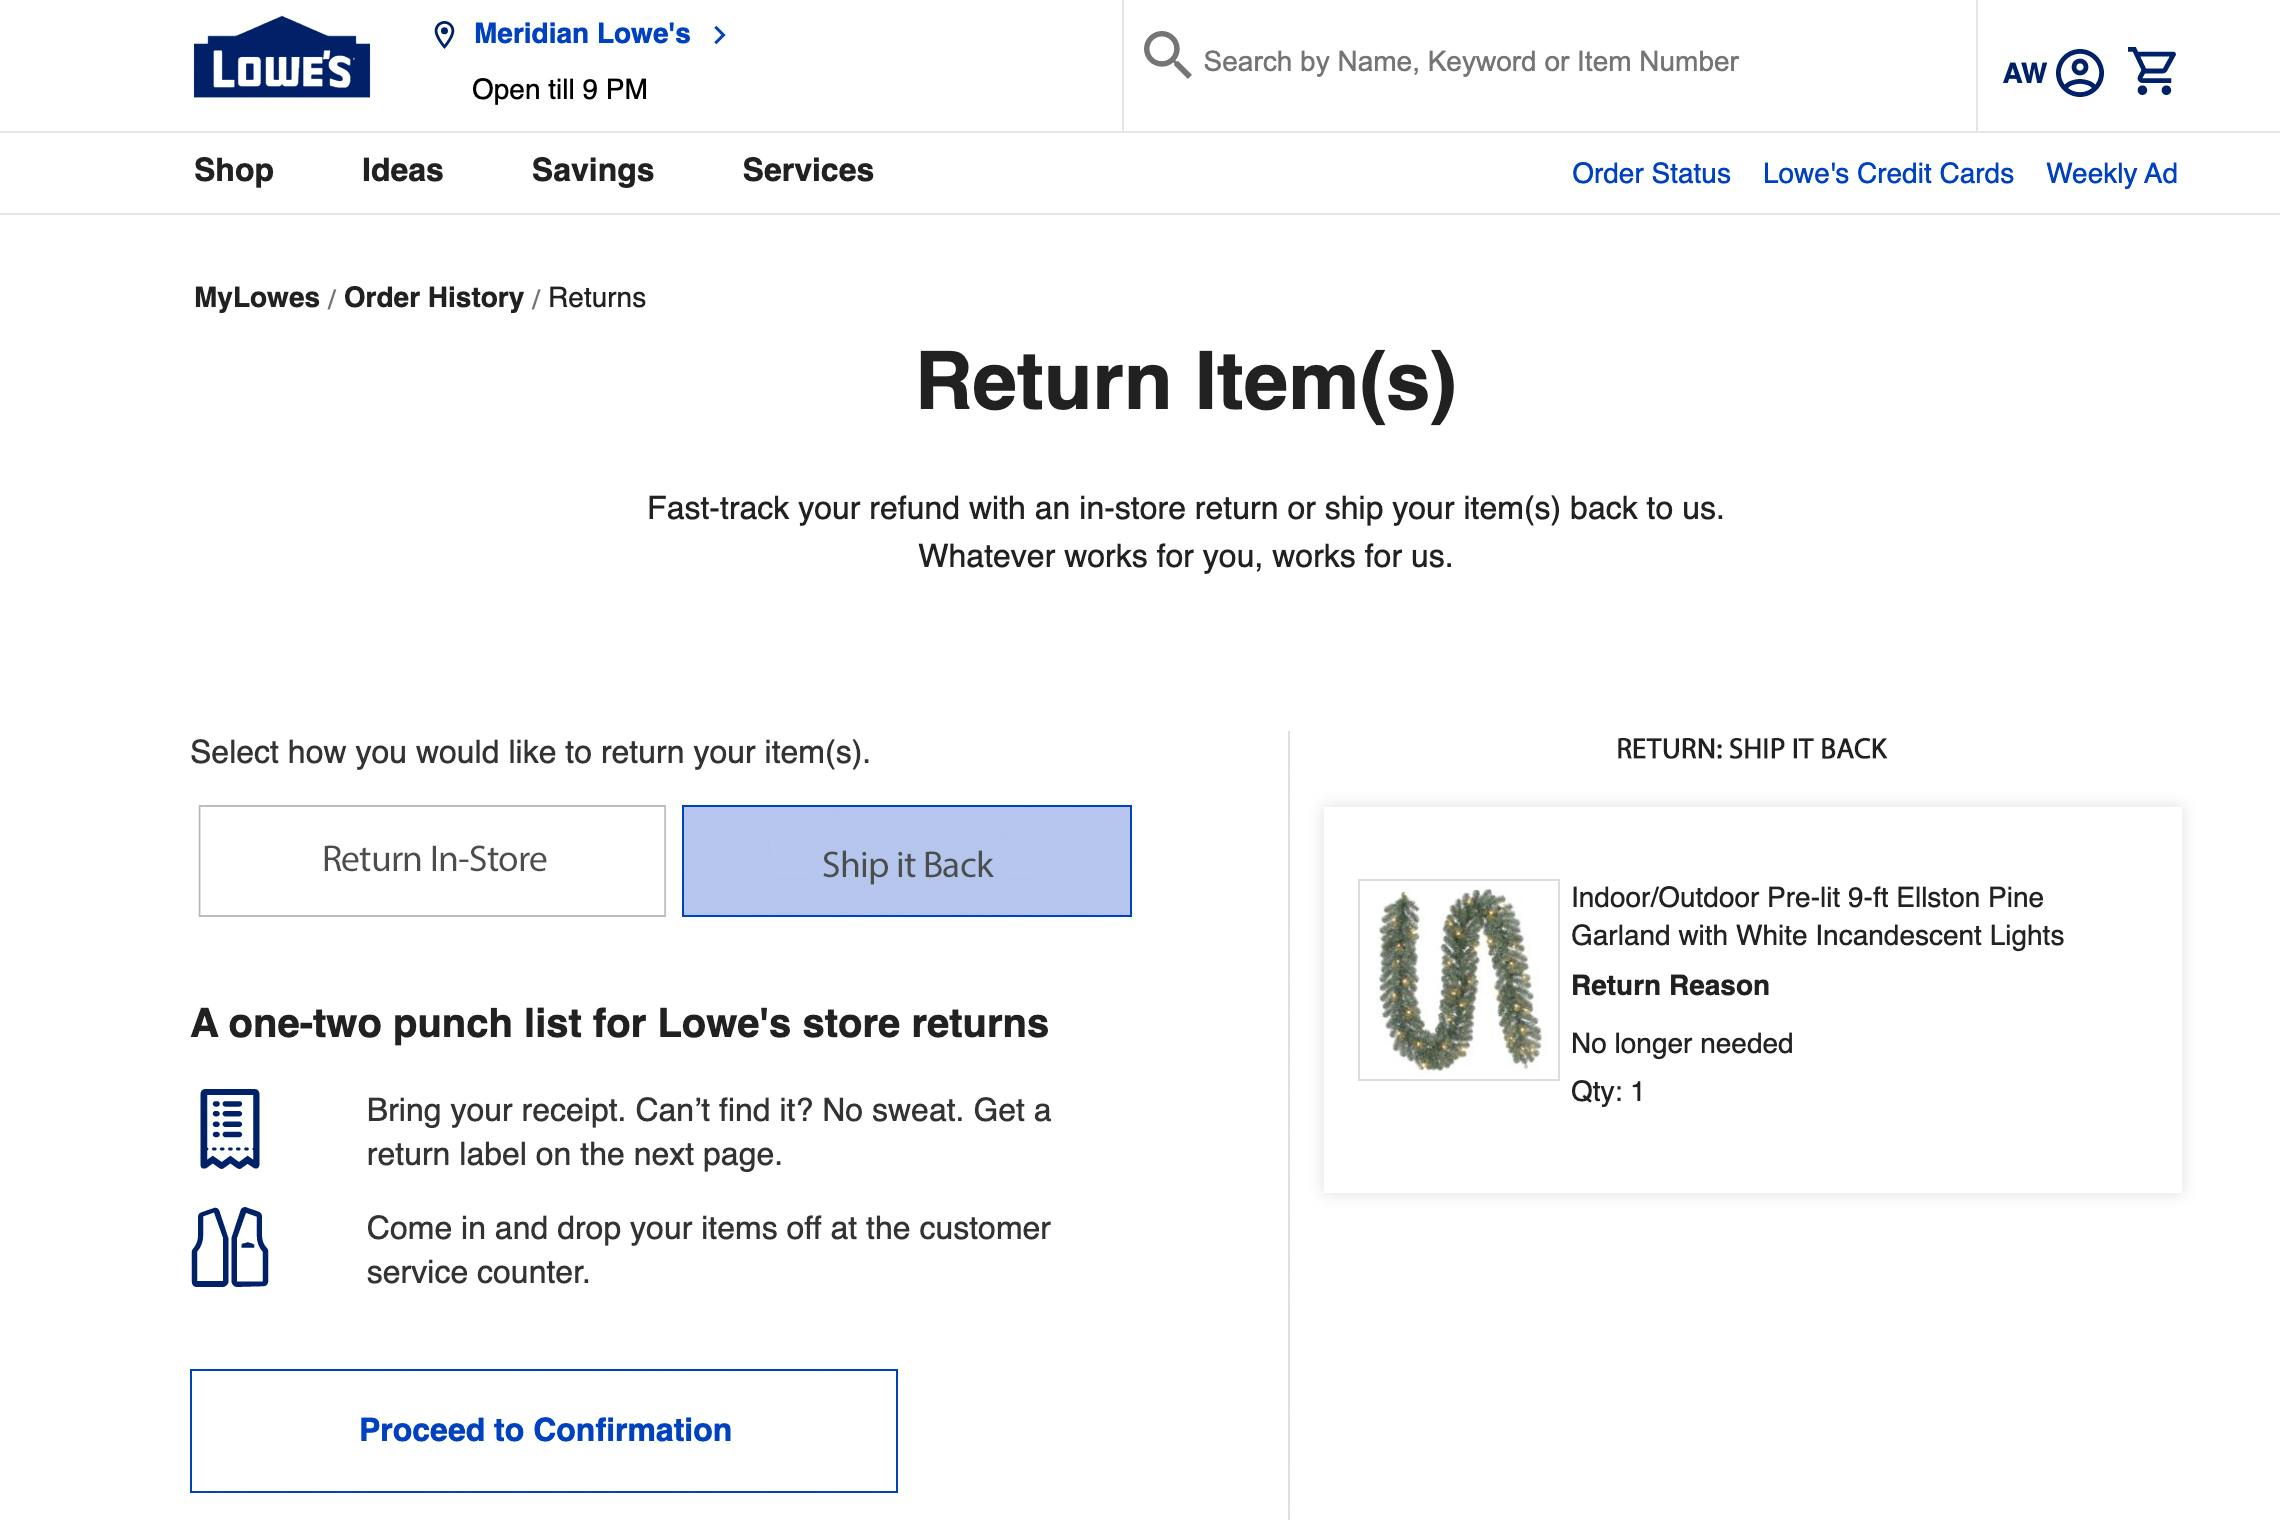 Heres How Lowes Return Policy Works - The Krazy Coupon Lady